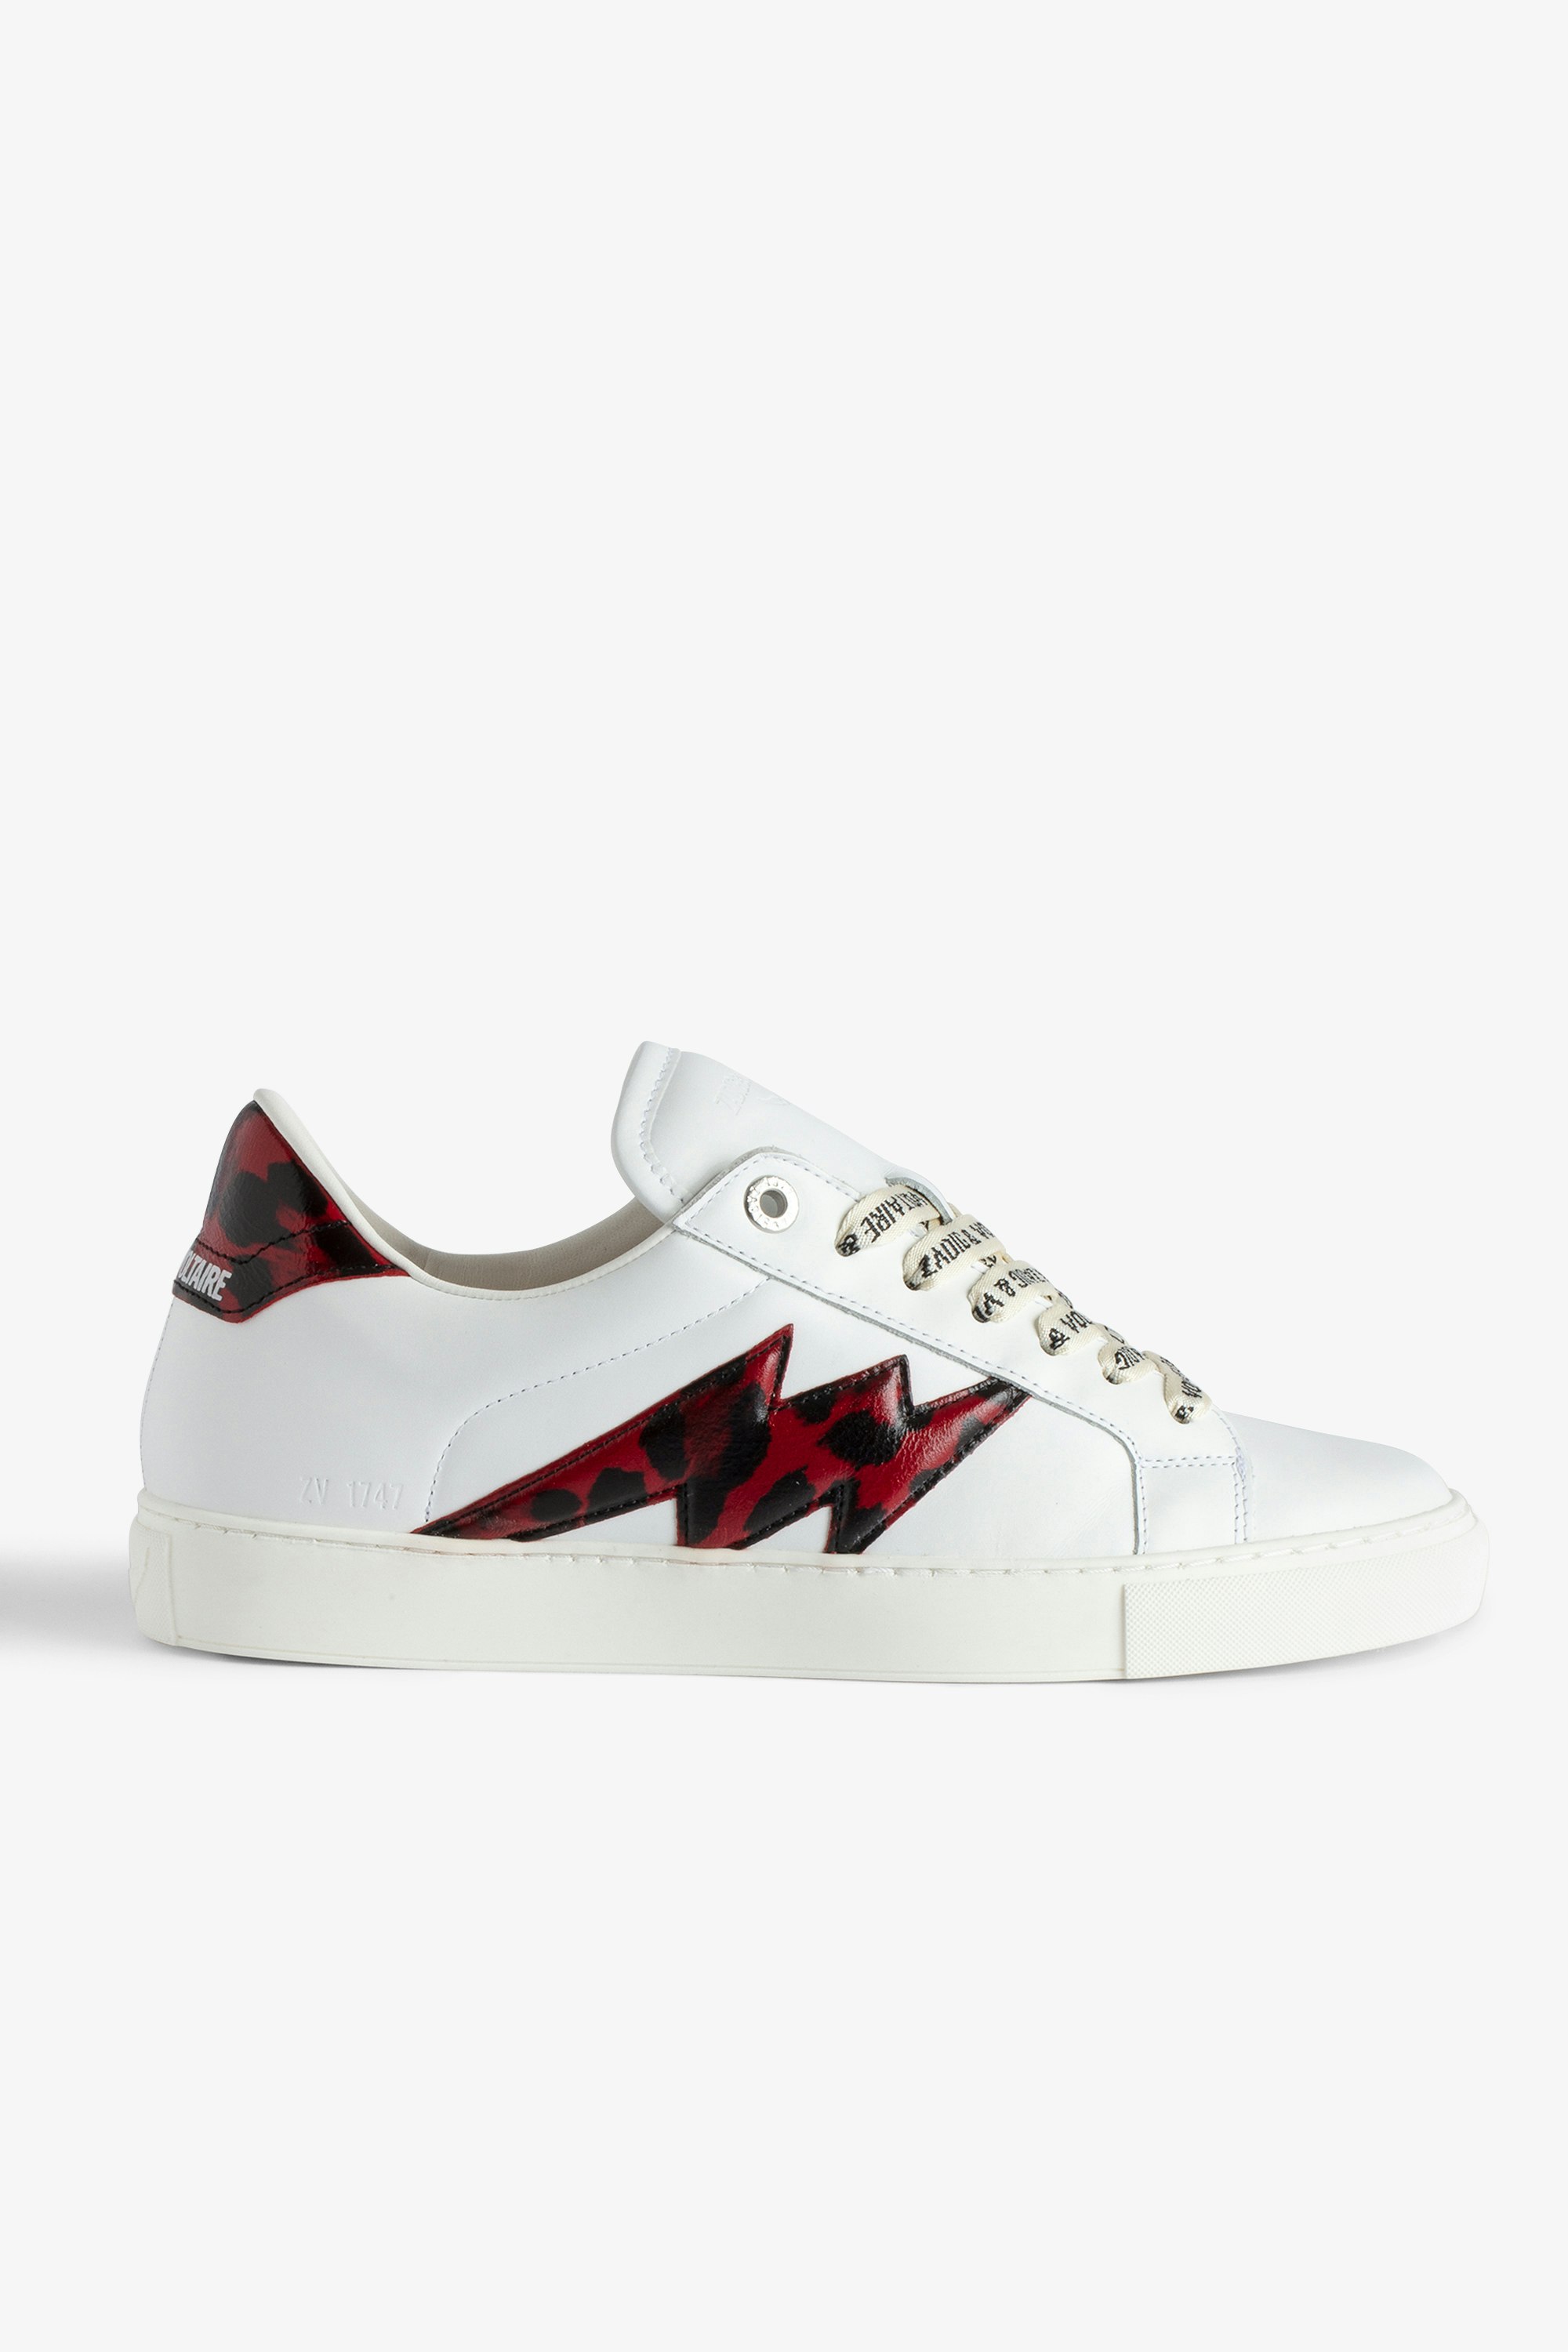 ZV1747 La Flash Low-Top Trainers - Women’s white smooth leather low-top trainers with lightning bolt panels and red leopard-effect reinforcement.